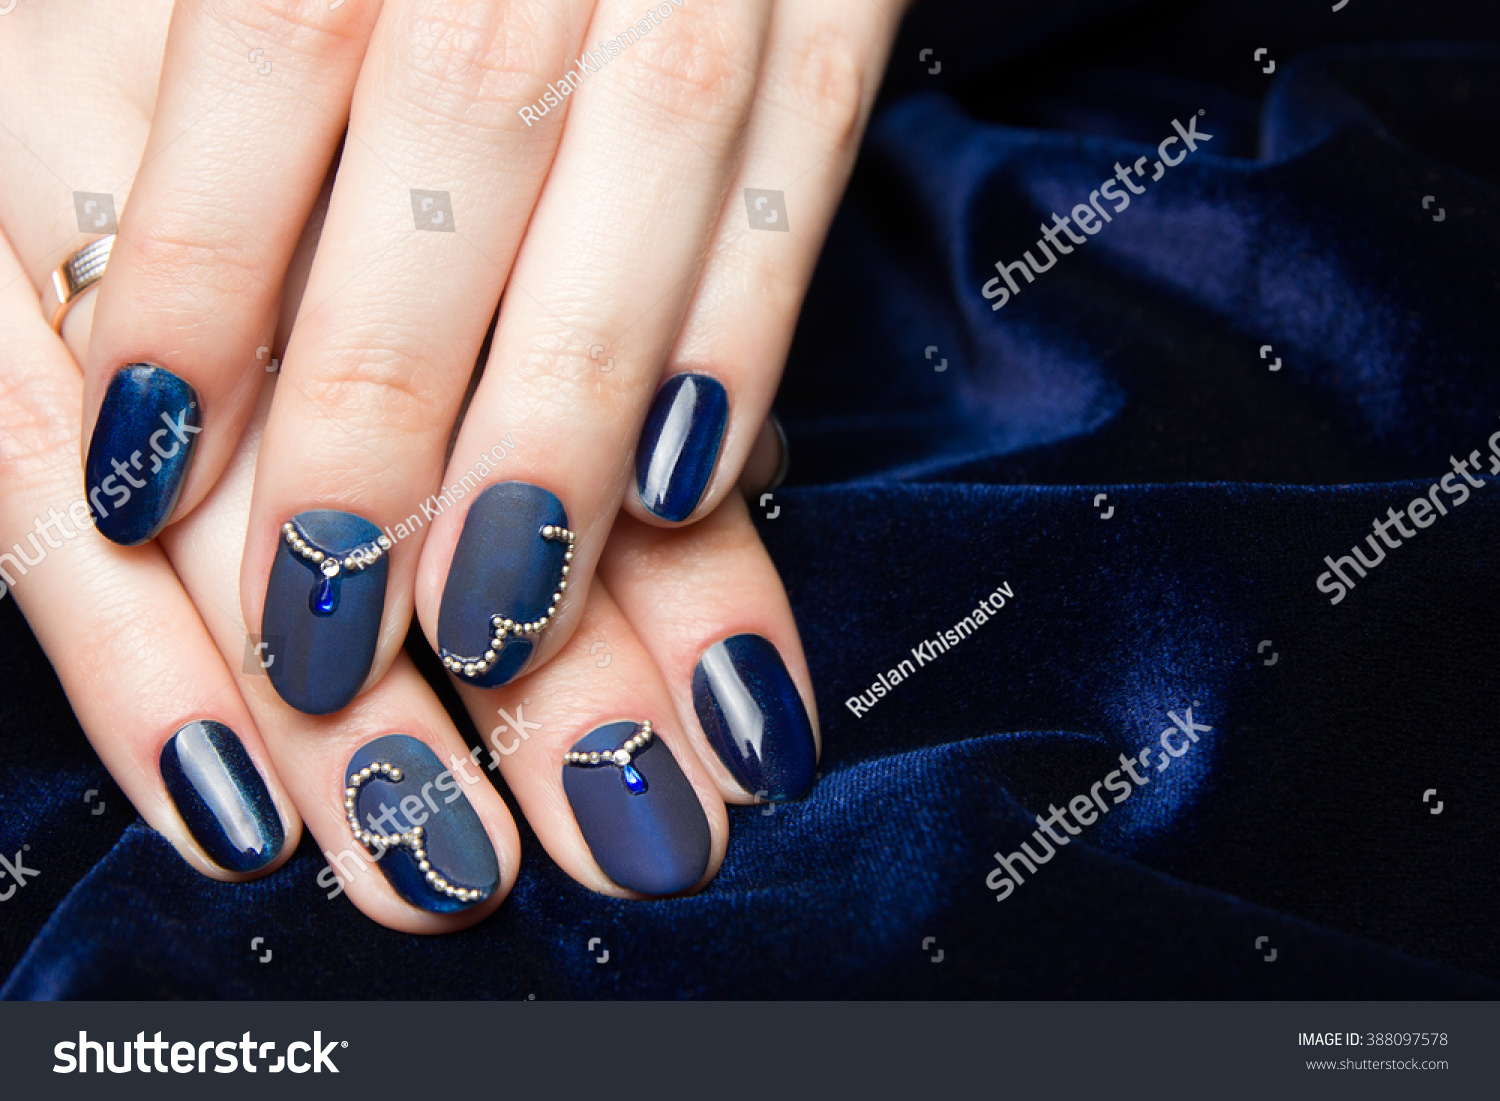 French manicure - beautiful manicured female hands with blue manicure with rhinestones on dark blue background #388097578